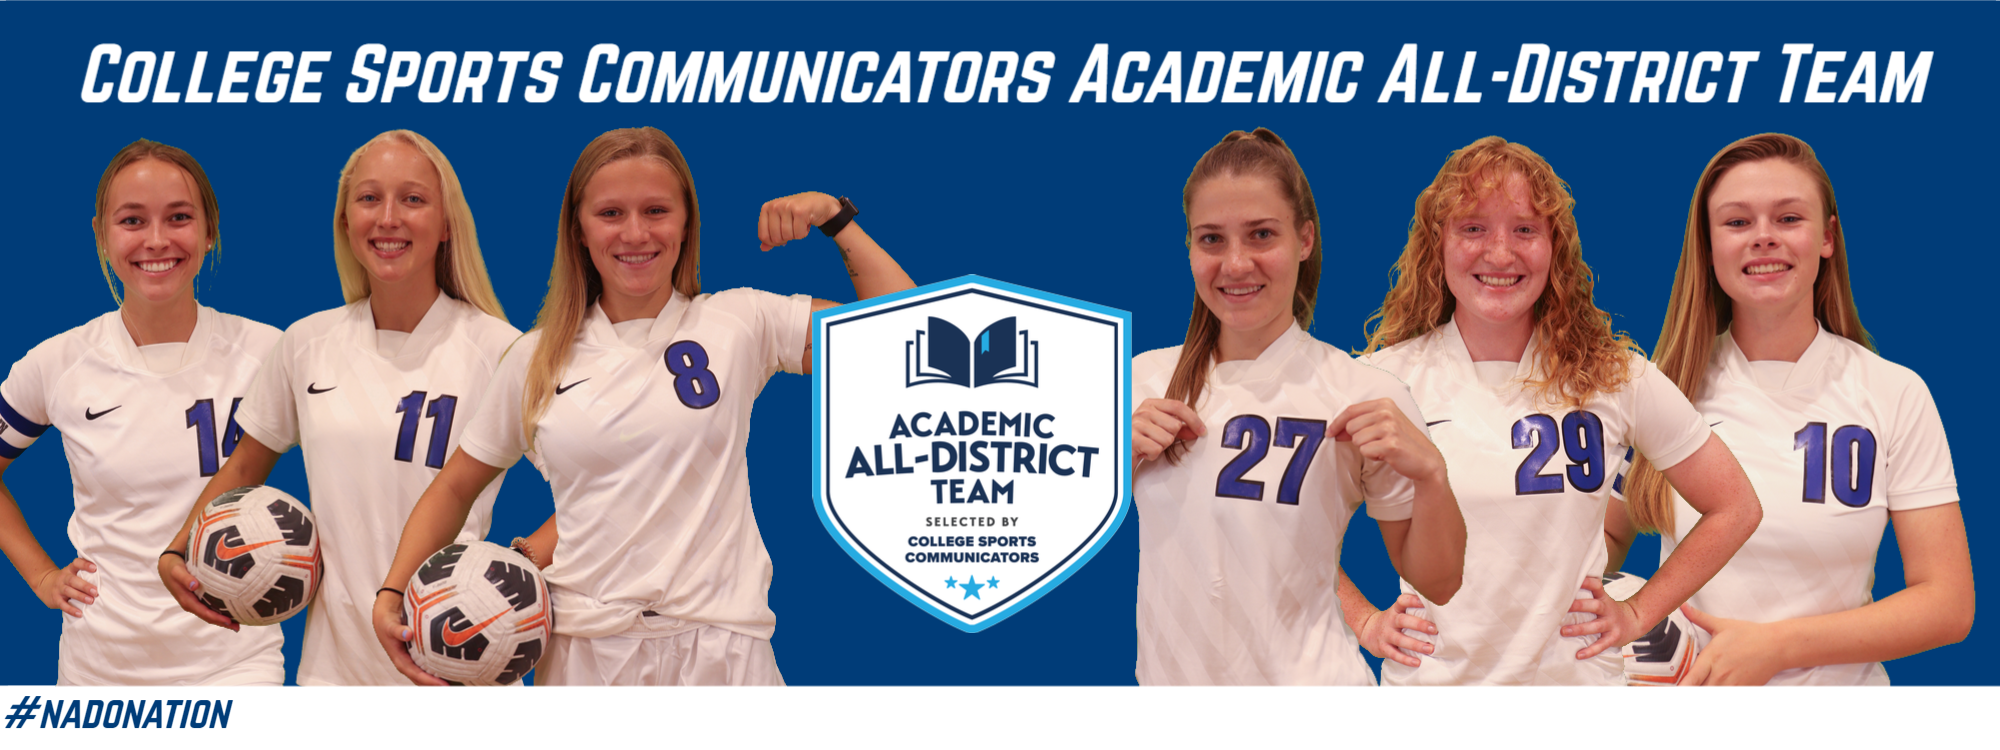 Program-Record Six Tornados Named to Women’s Soccer Academic All-District Team